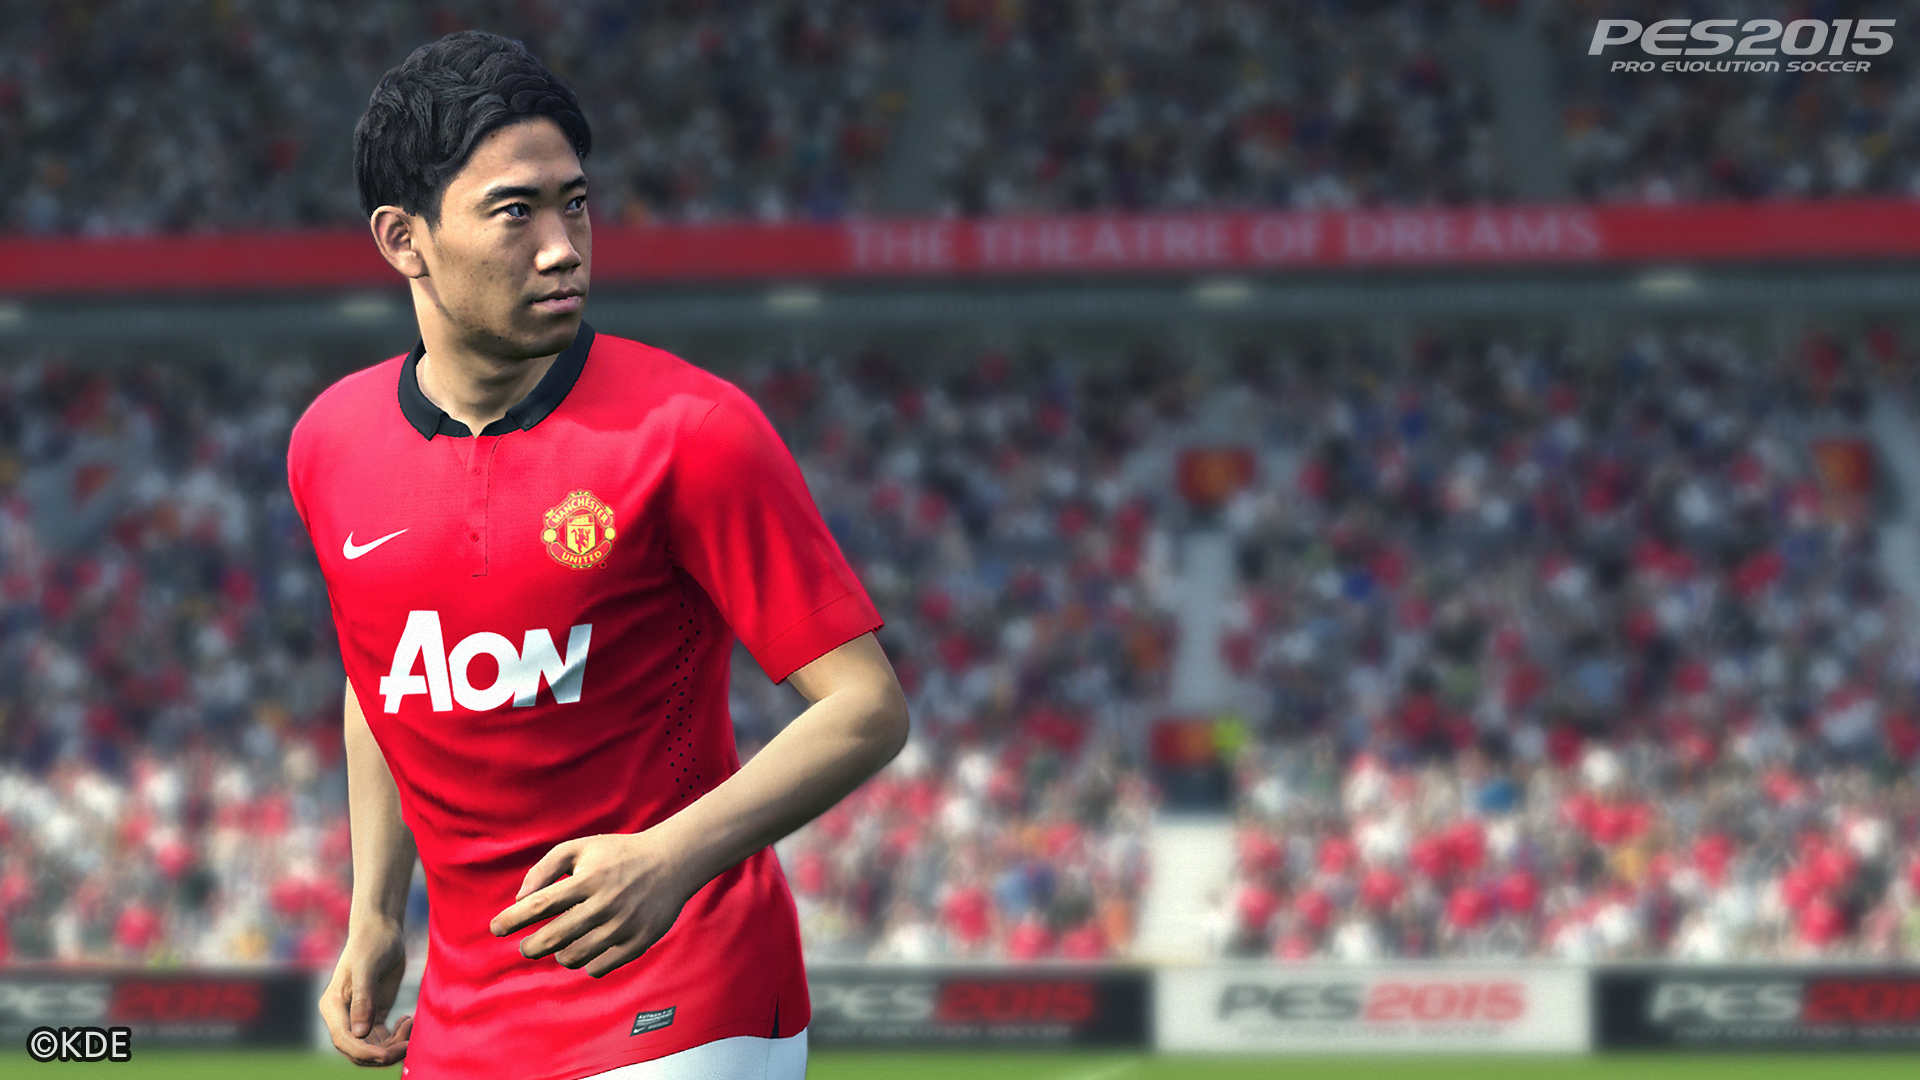 PES 2015 First Screens #6